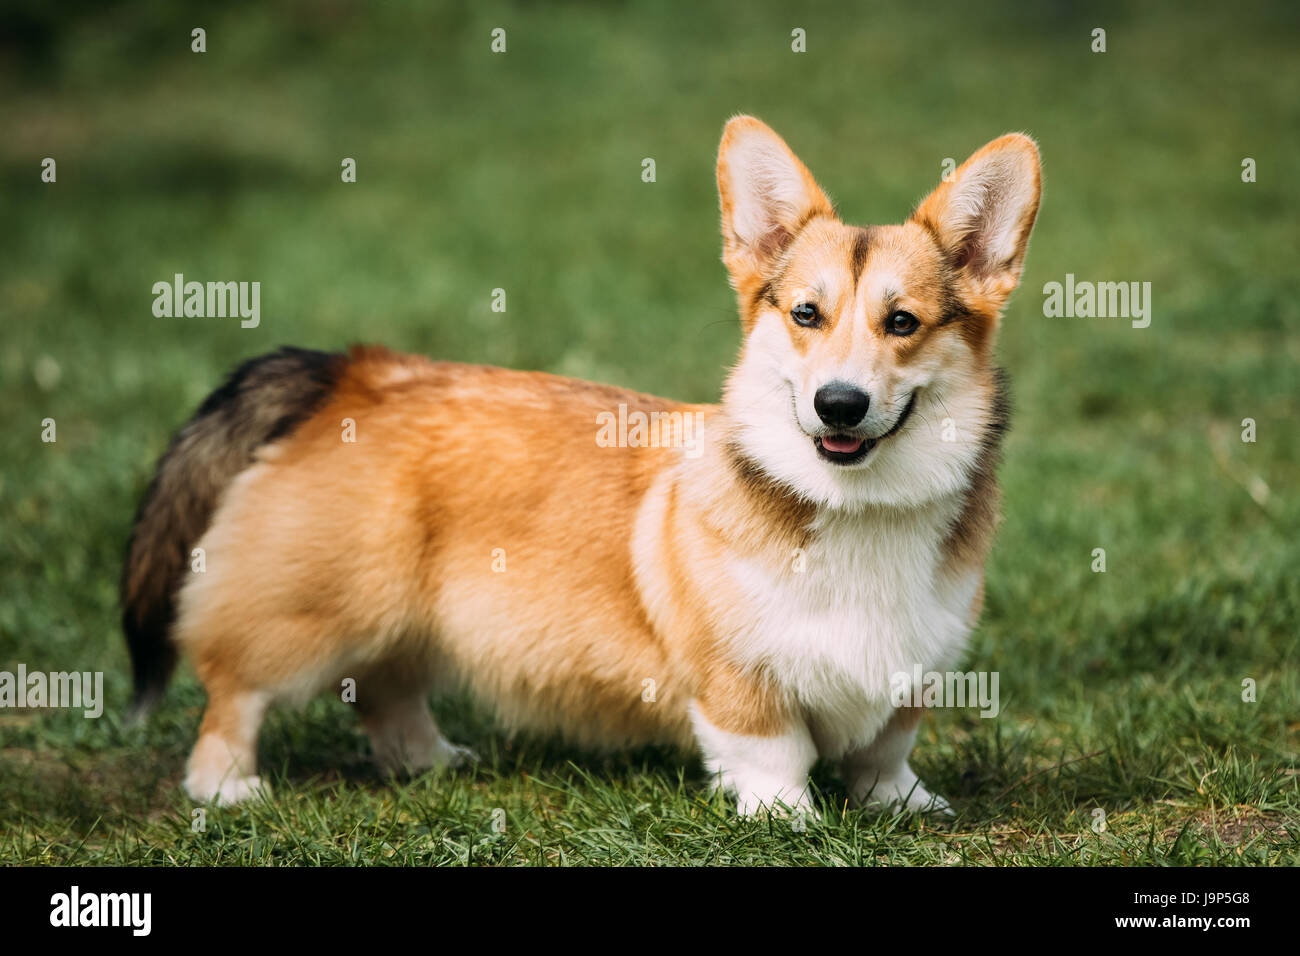 Funny Happy Pembroke Welsh Corgi Dog Playing In Green Summer Grass. Welsh Corgi Is A Small Type Of Herding Dog That Originated In Wales Stock Photo